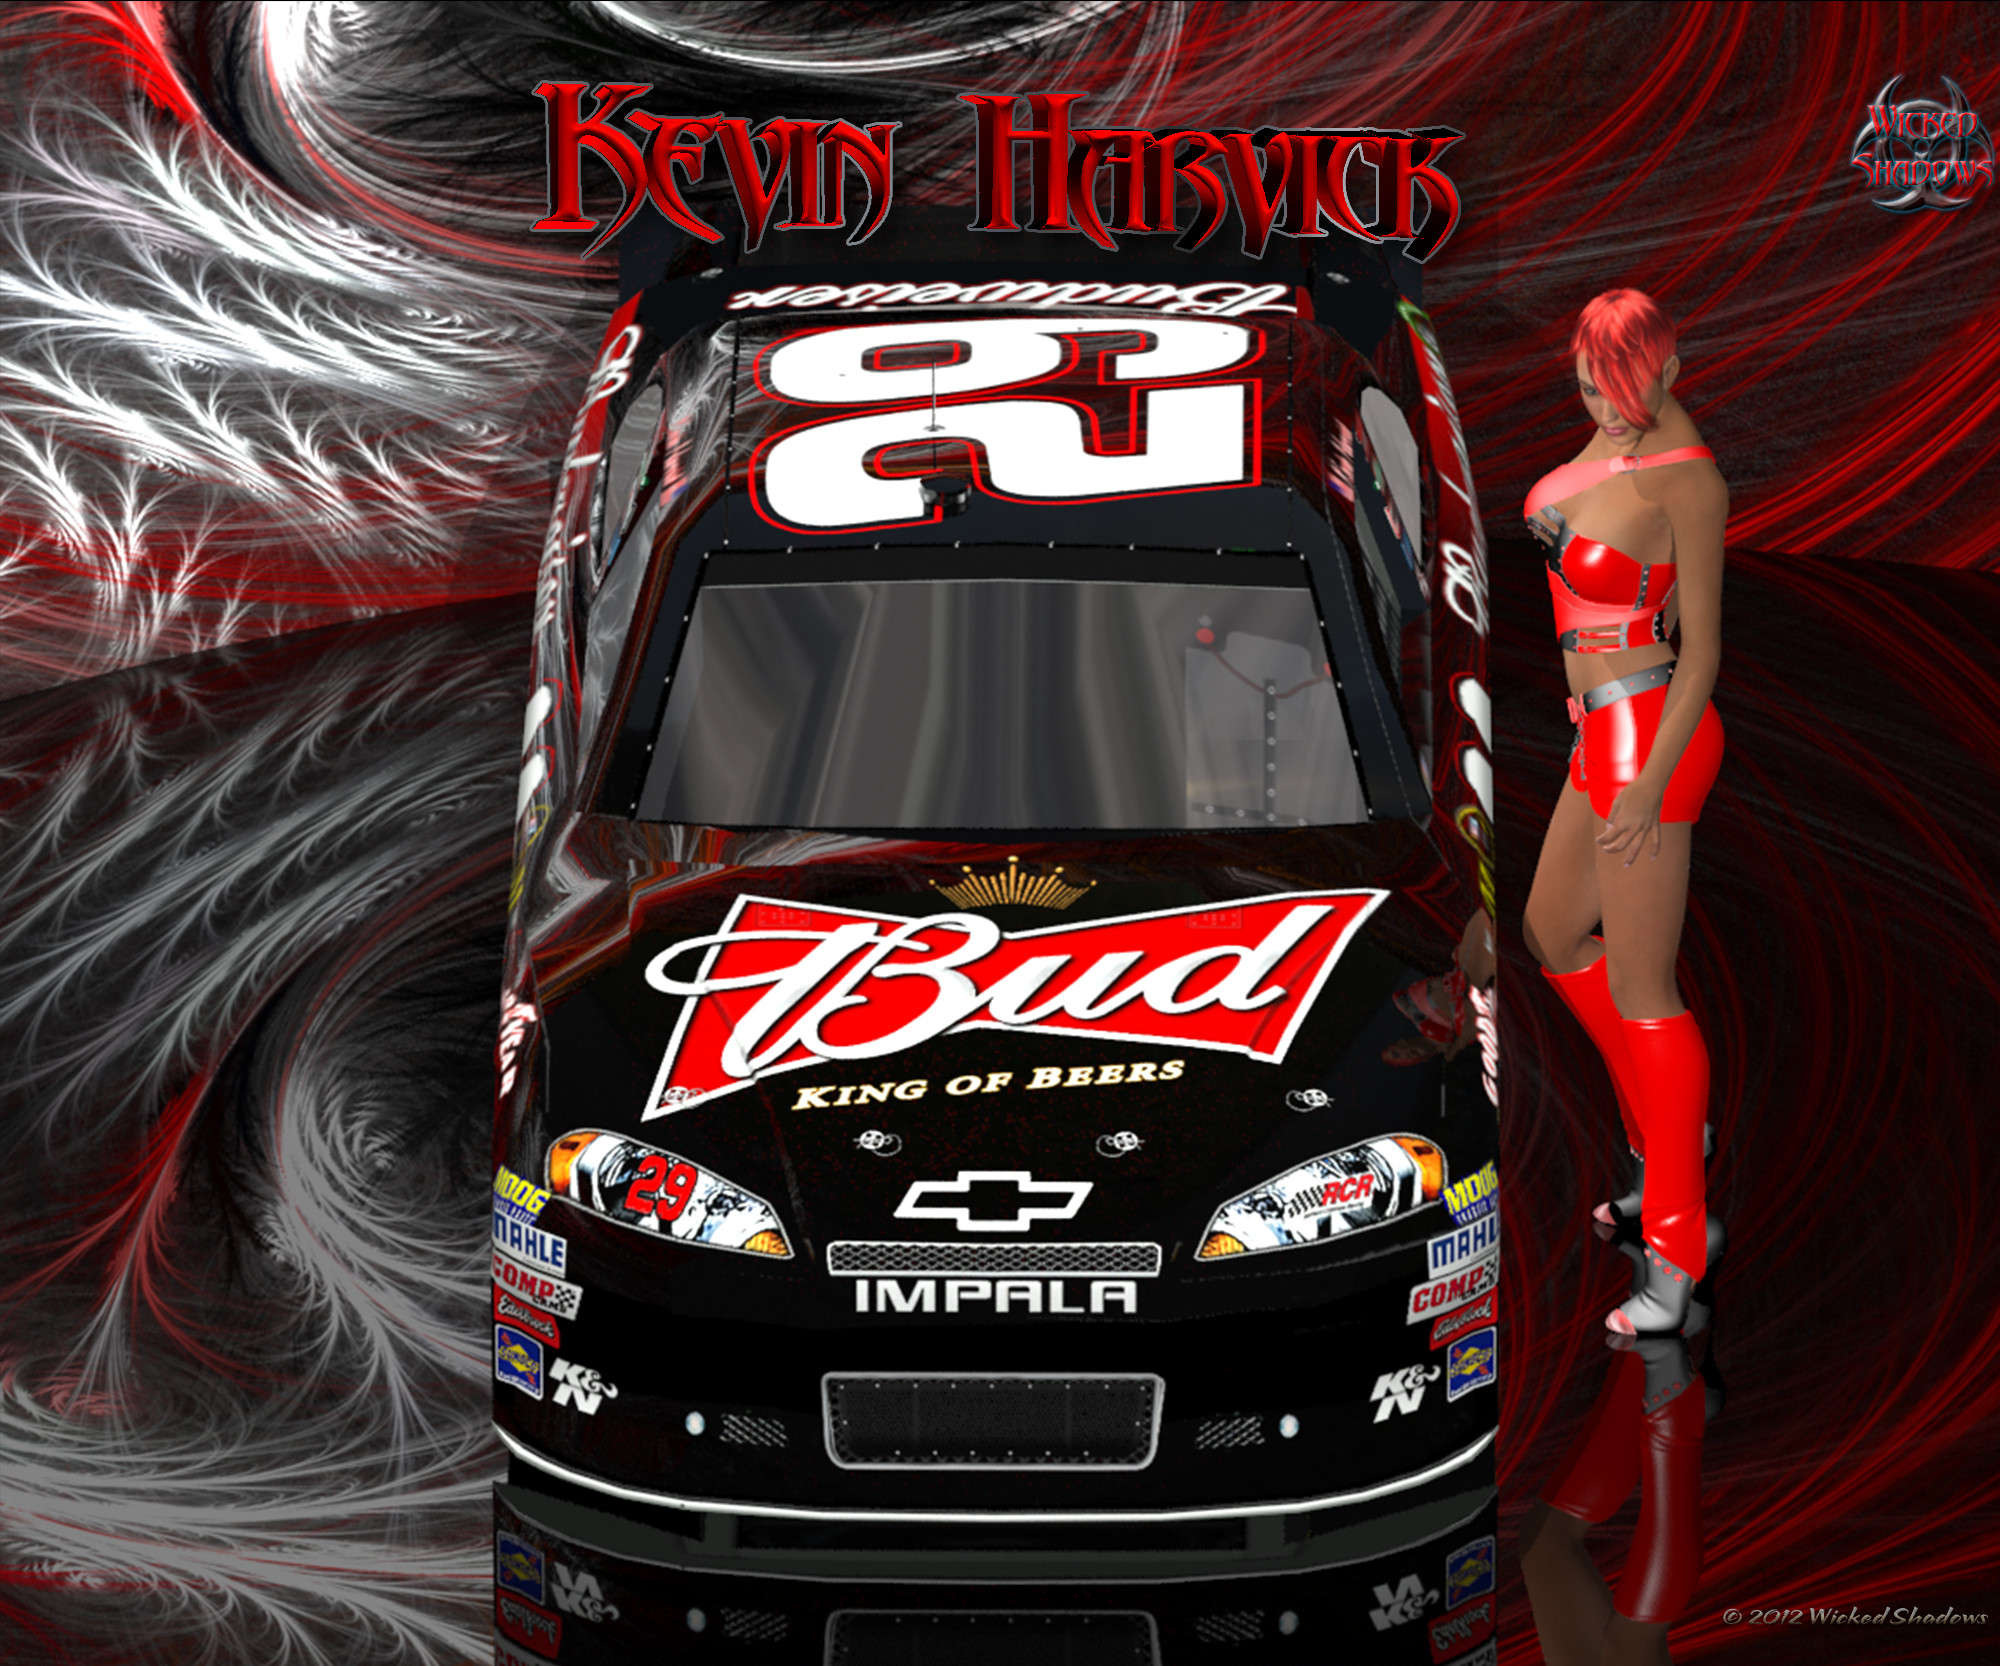 Kevin Harvick wallpaper by stryker1314  Download on ZEDGE  ba4e